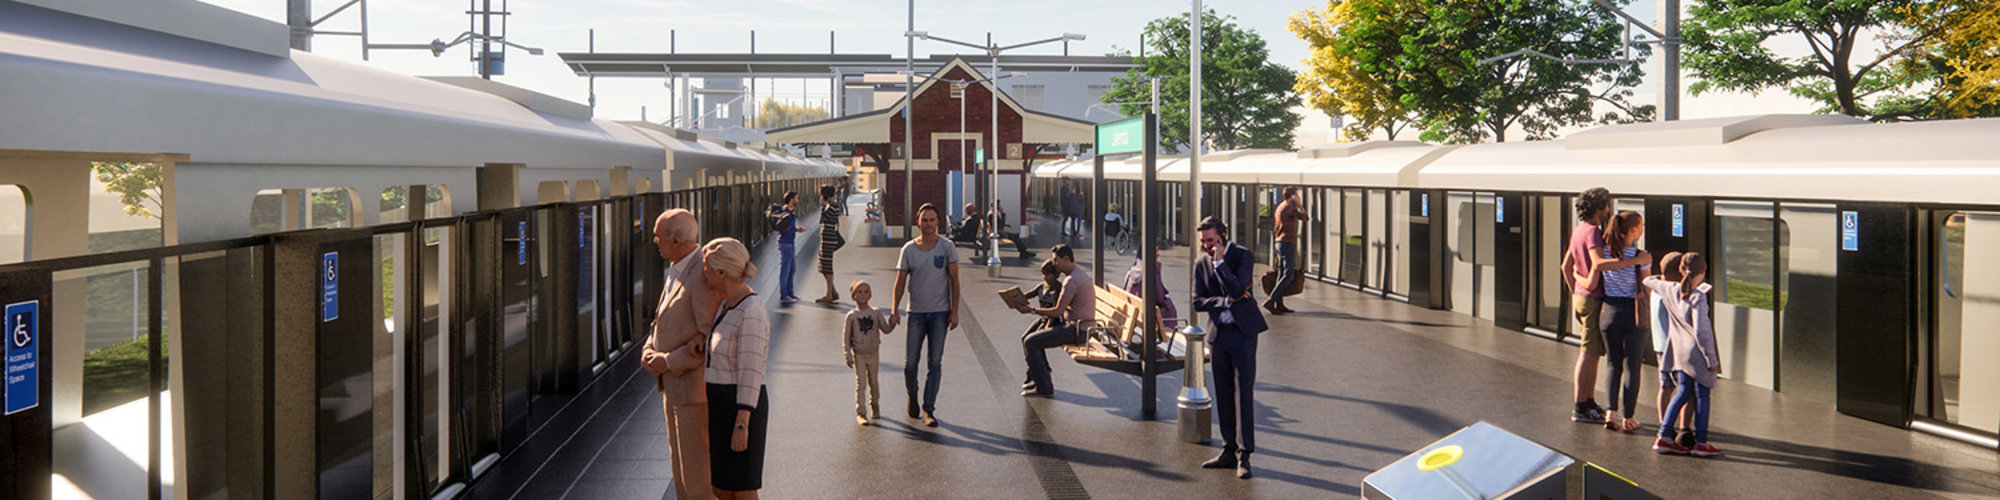 An artist's impression of the future metro station at Lakemba as viewed from the platform, being delivered as part of the Sydney Metro City & Southwest project.